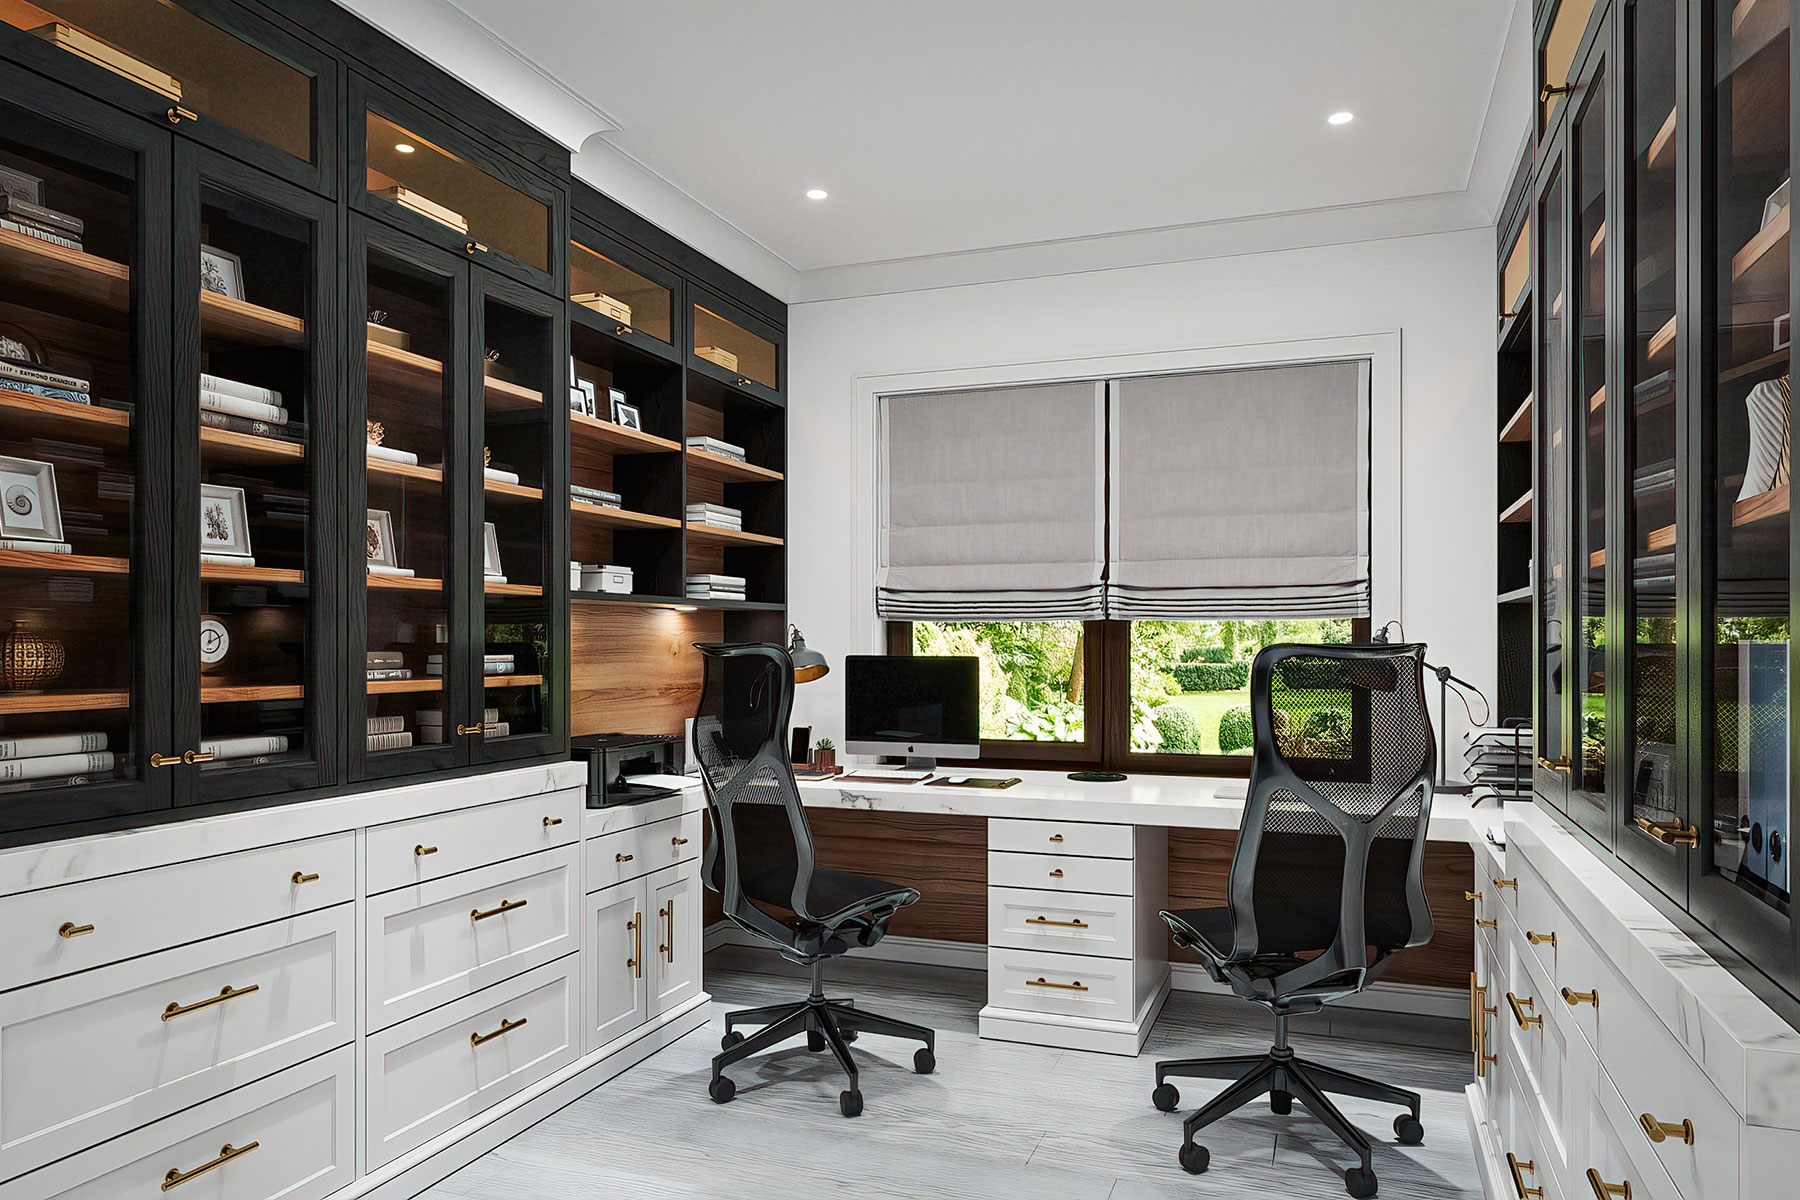 Efficient storage solutions are essential for maintaining a clutter-free and well-organized workspace.